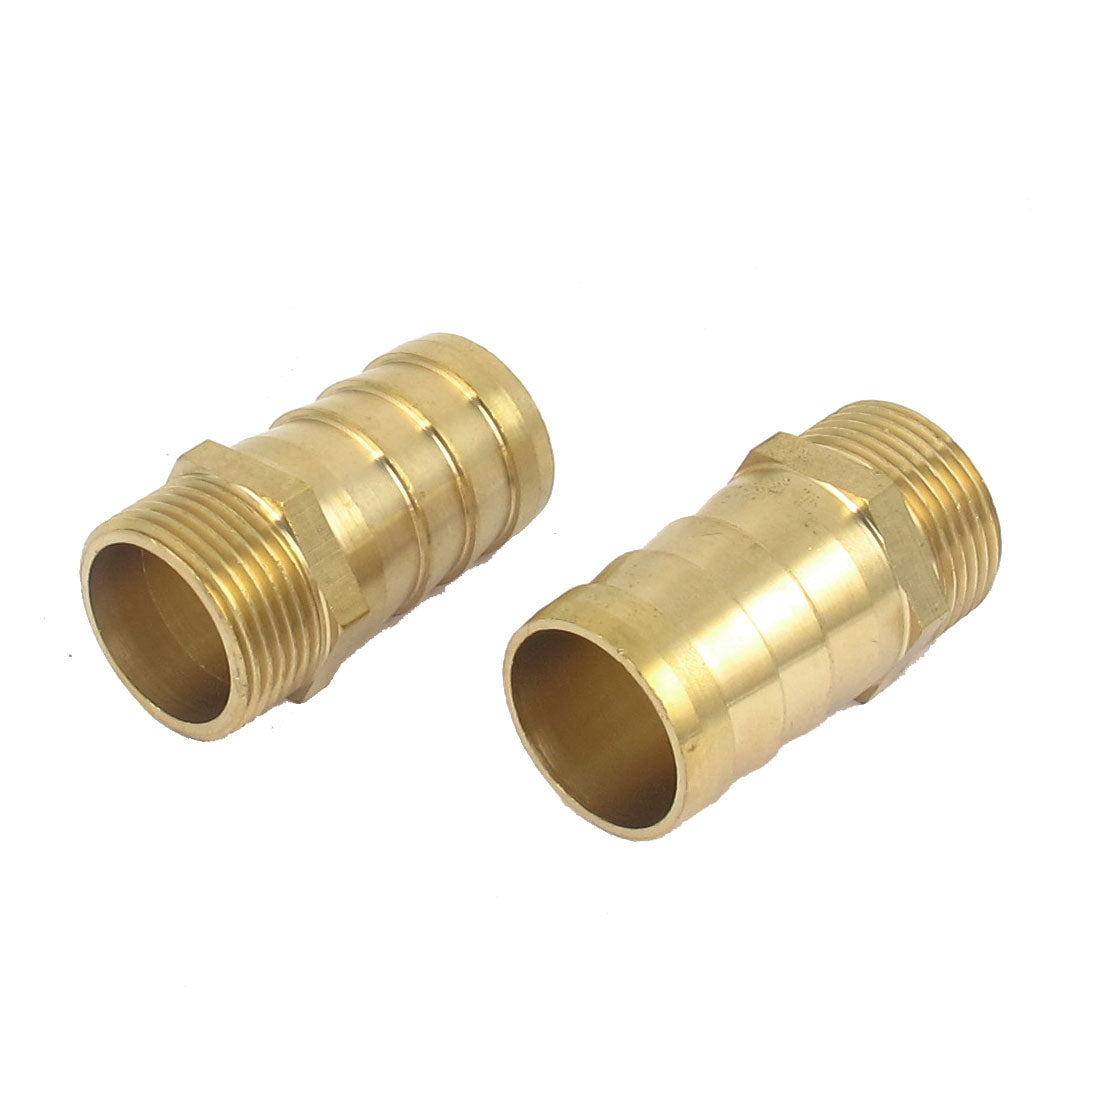 uxcell Uxcell Brass 3/4BSP Male Thread to 25mm Hose Barb Straight Fitting Adapter Coupler 2PCS